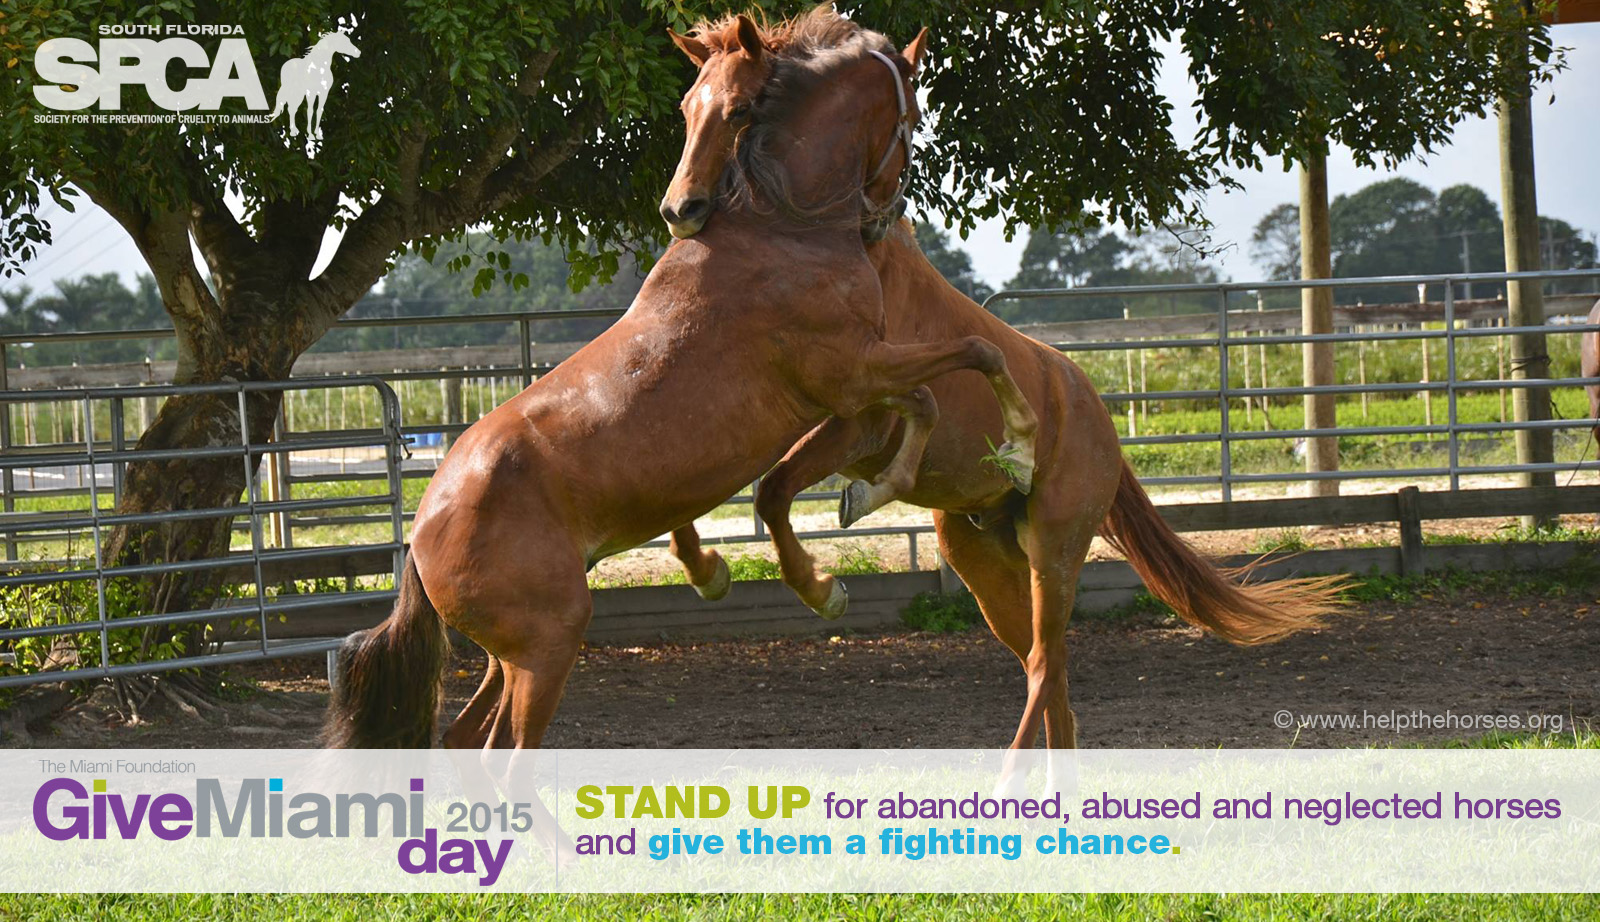 Stand Up for the Horses on Give Miami Day